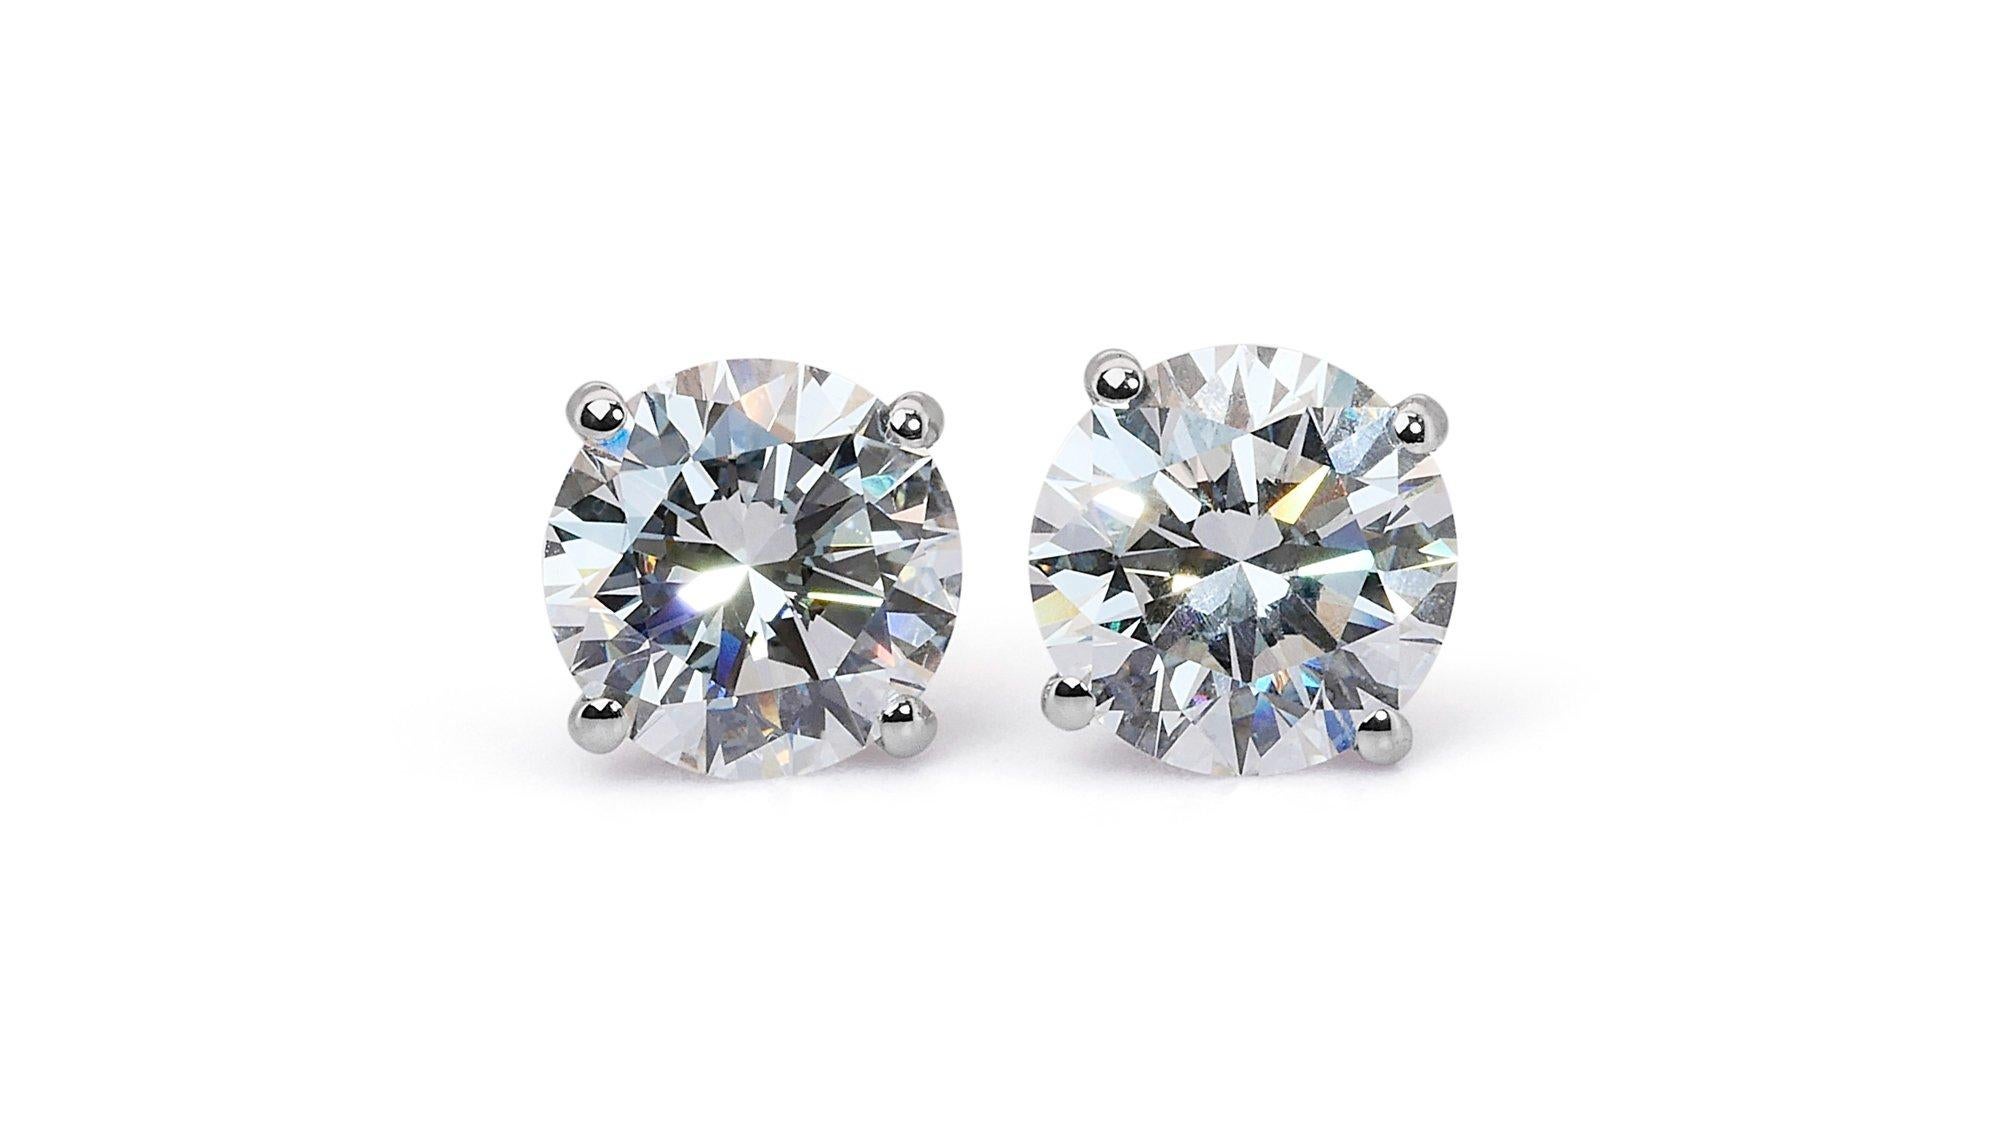 A sophisticated classic pair of stud earrings with a dazzling 3.13 carat total weight round brilliant natural diamonds with Ideal cut by Gia lab, means that this pair of diamonds is extremely shine and sparkles.

The ring is made of 18K White Gold